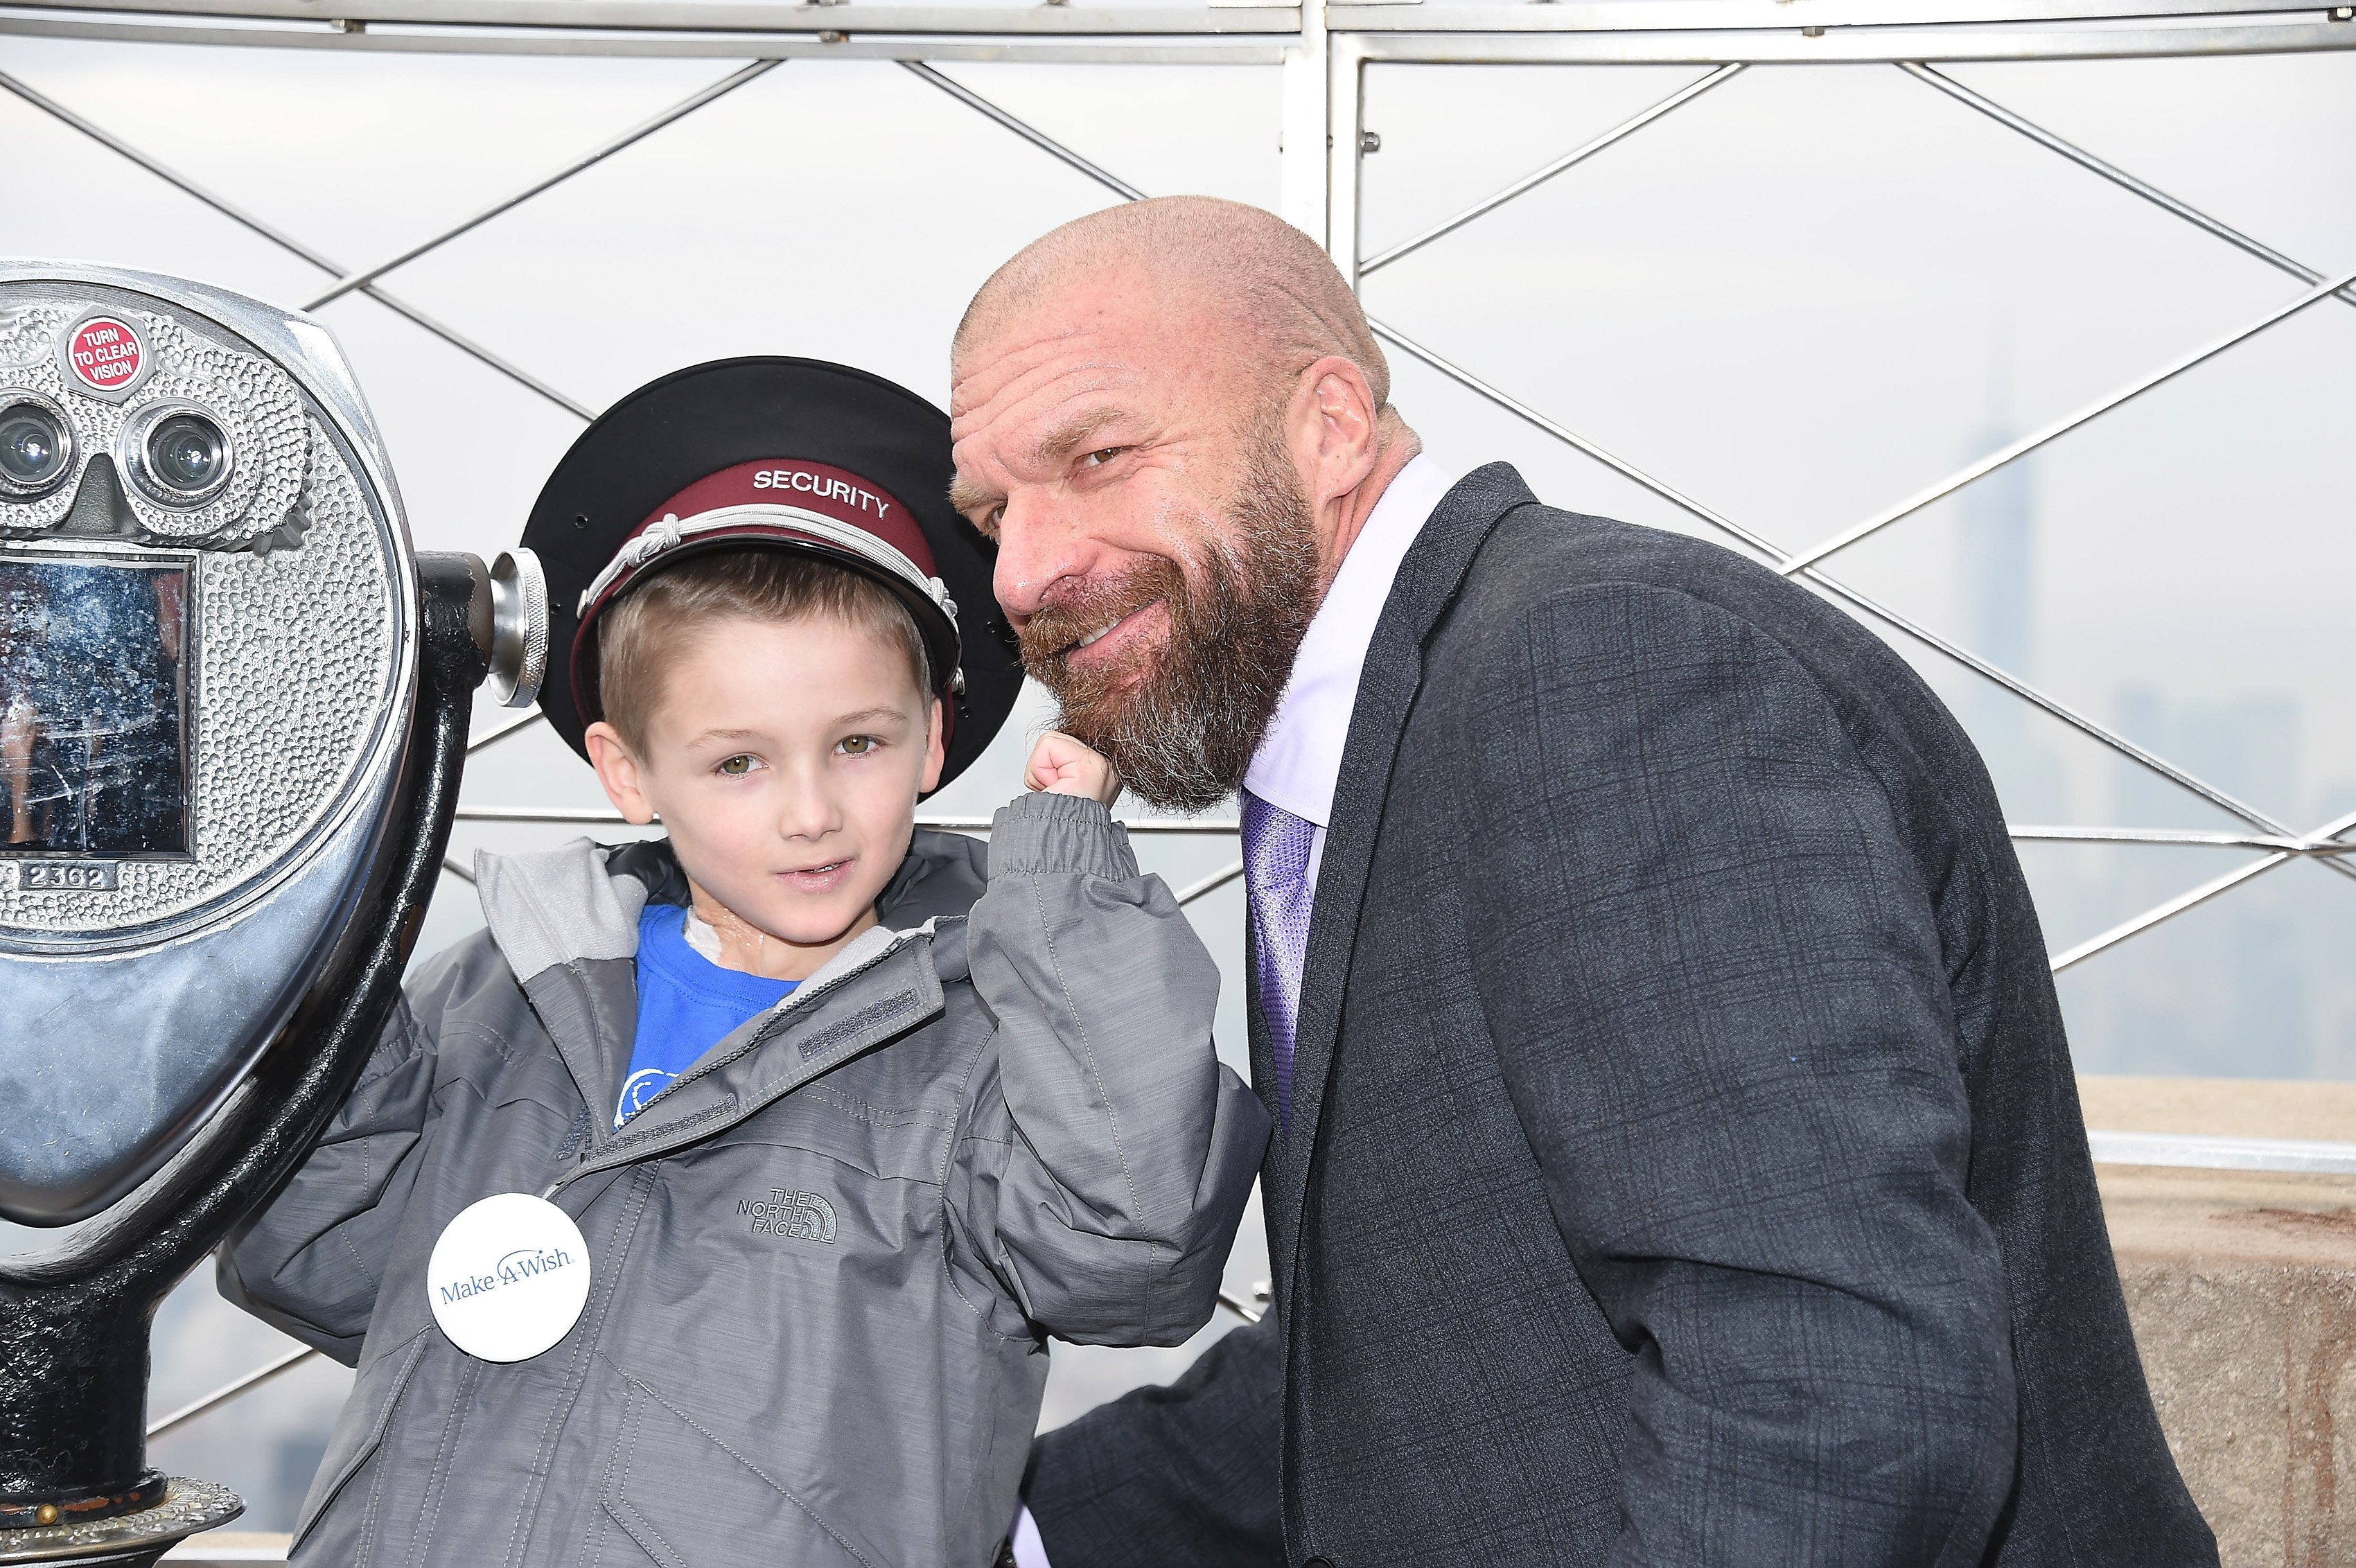 Triple H, Stephanie McMahon & Dana Warrior Turn The Empire State Build Red For RAW 25 (Photo Gallery)